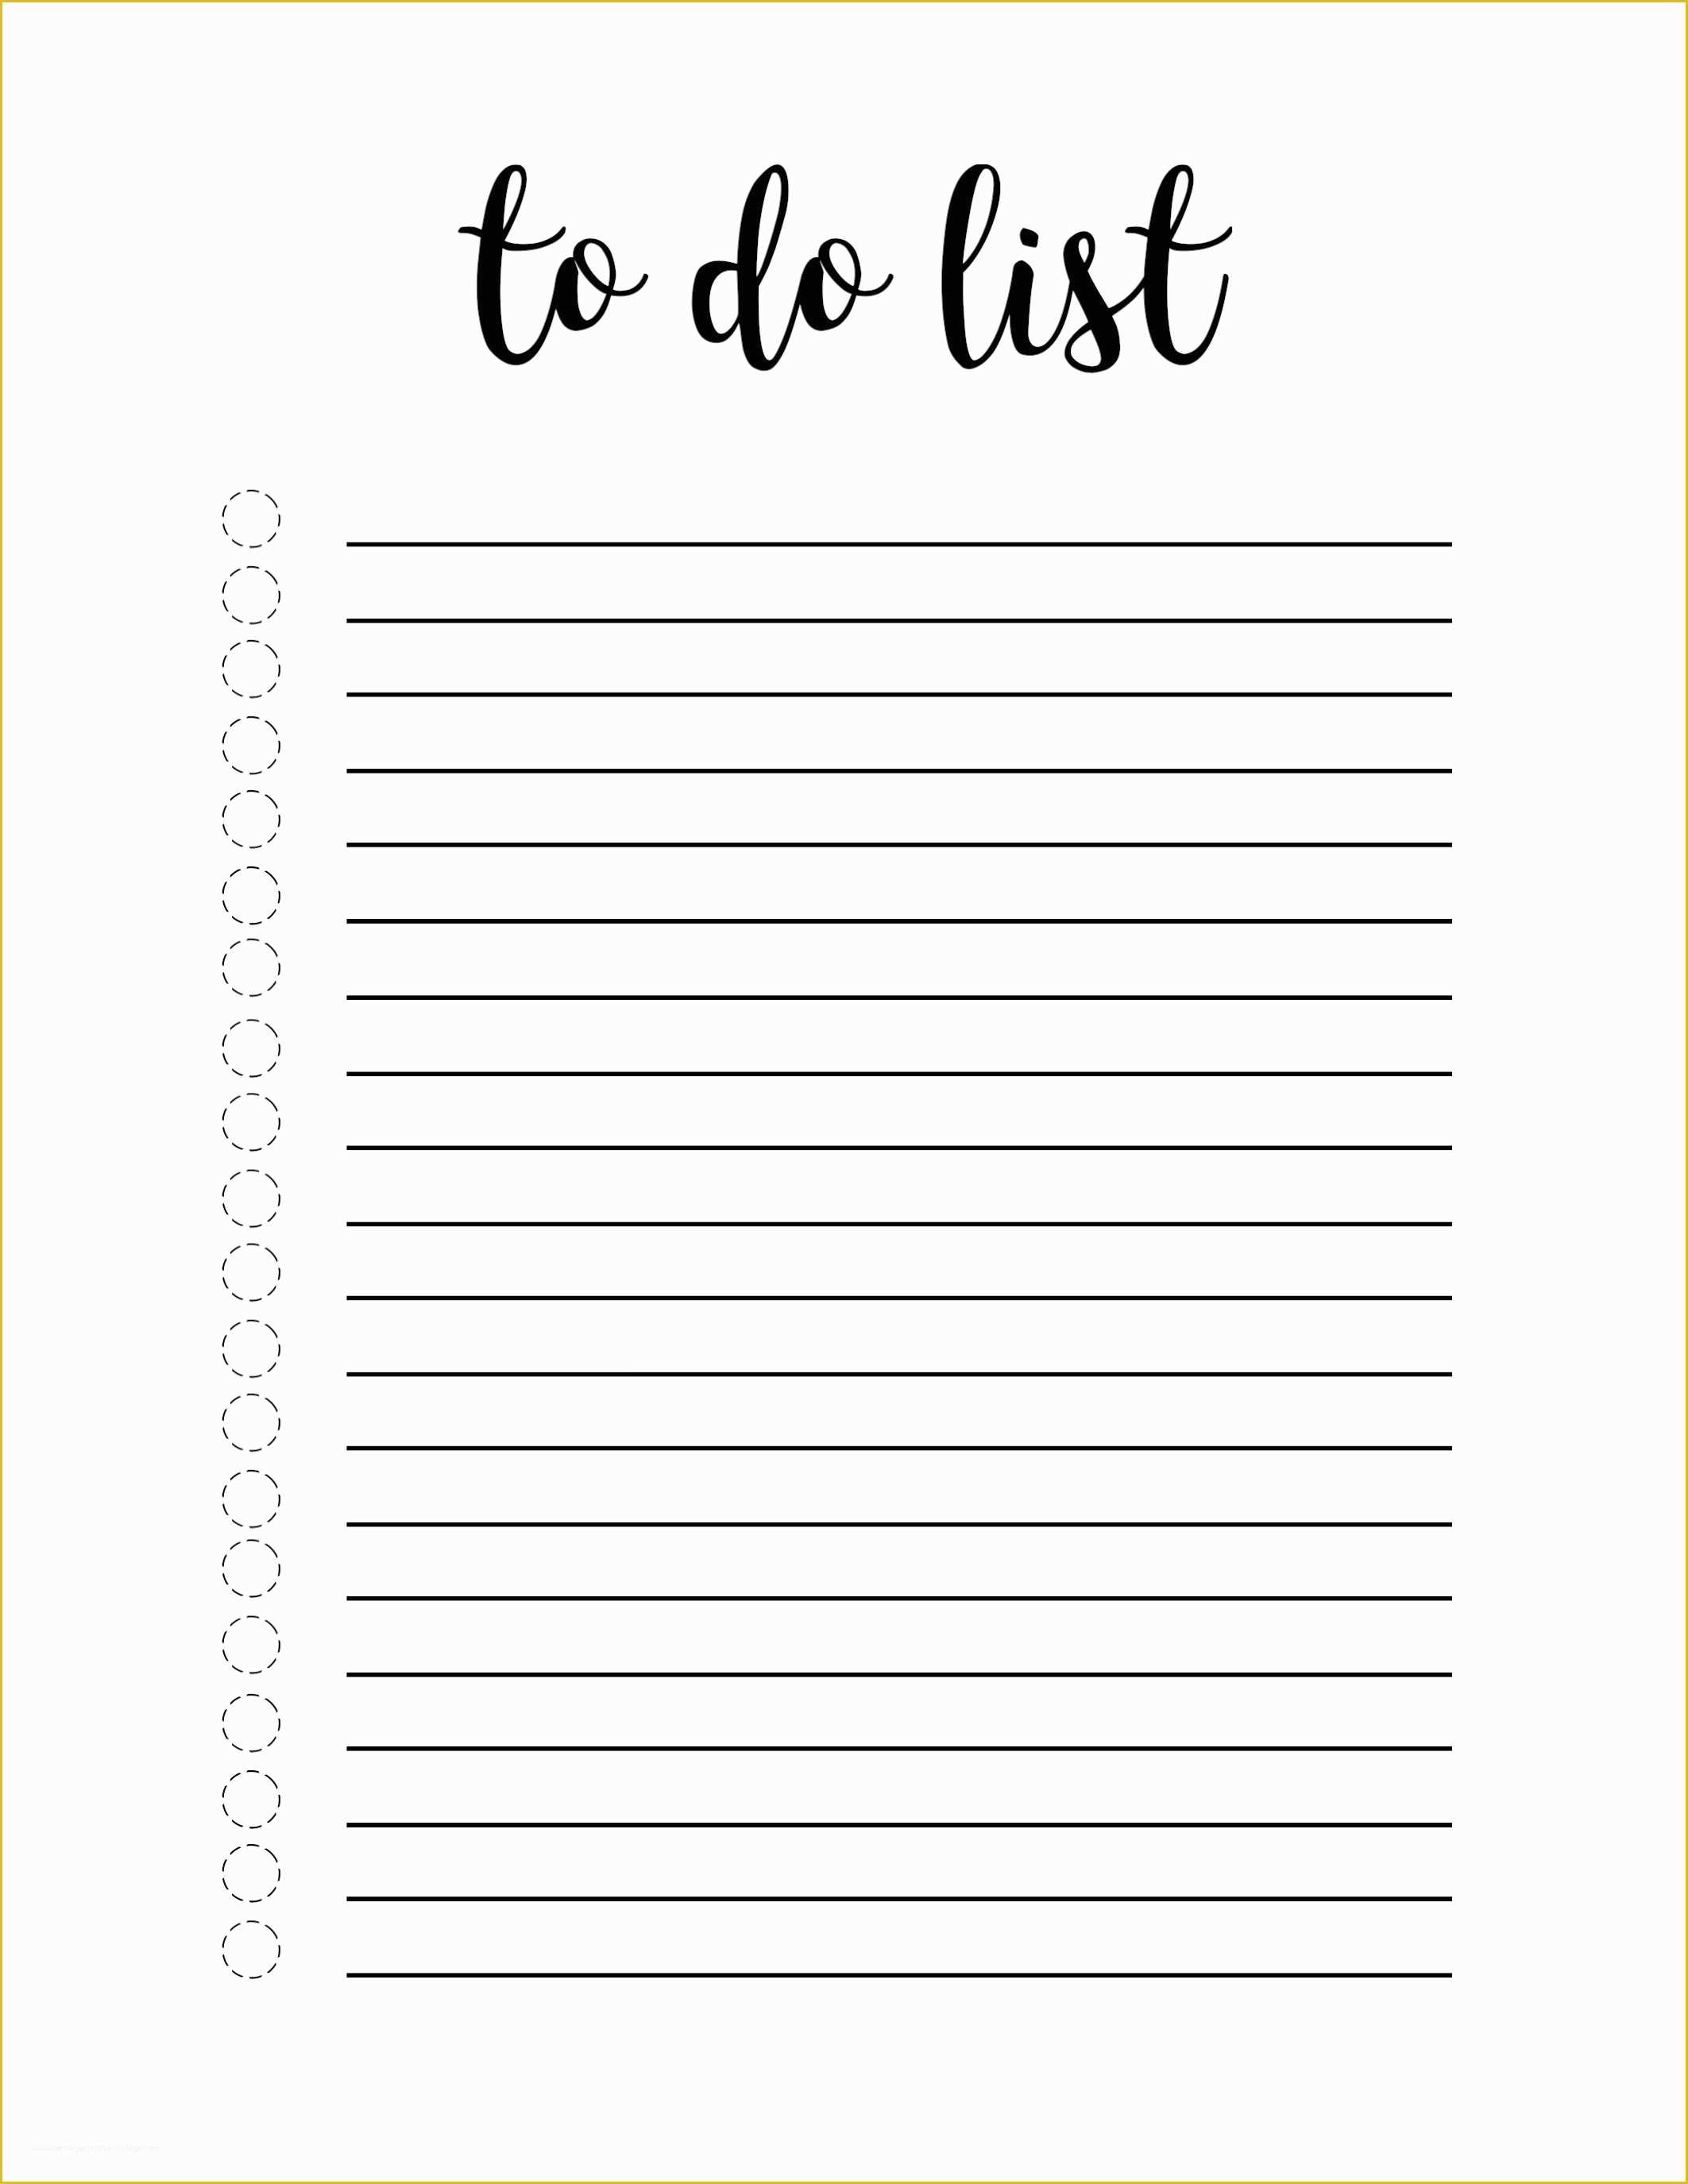 Free Editable to Do List Template Of Free Printable to Do List Template Keep It to Her